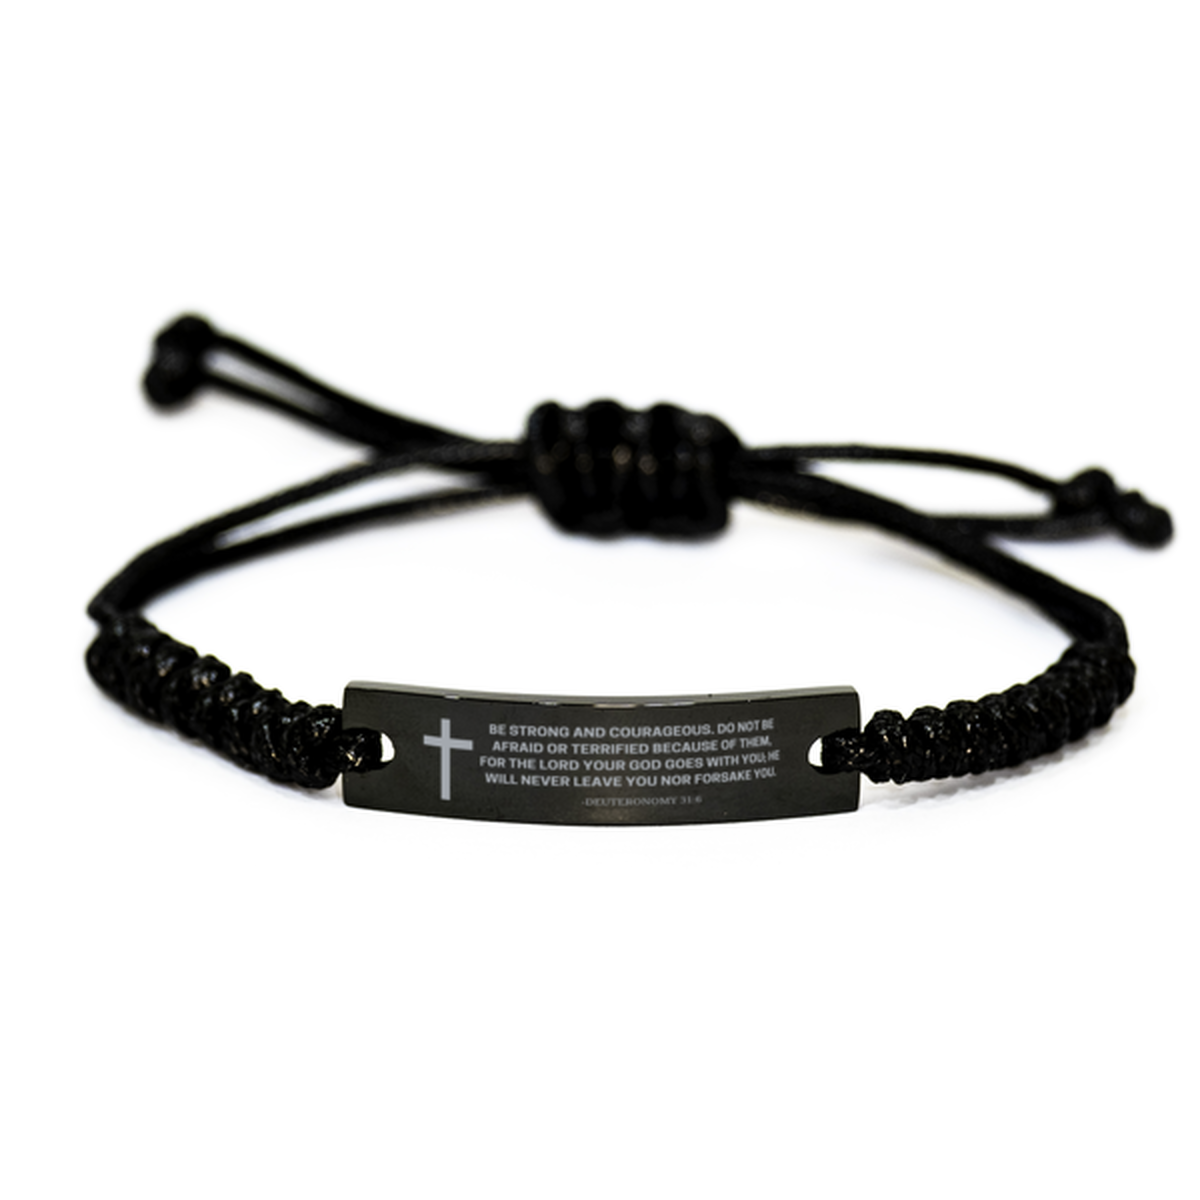 Baptism Gifts For Teenage Boys Girls, Christian Bible Verse Black Rope Bracelet, He will never leave you nor forsake you, Catholic Confirmation Gifts for Son, Godson, Grandson, Nephew